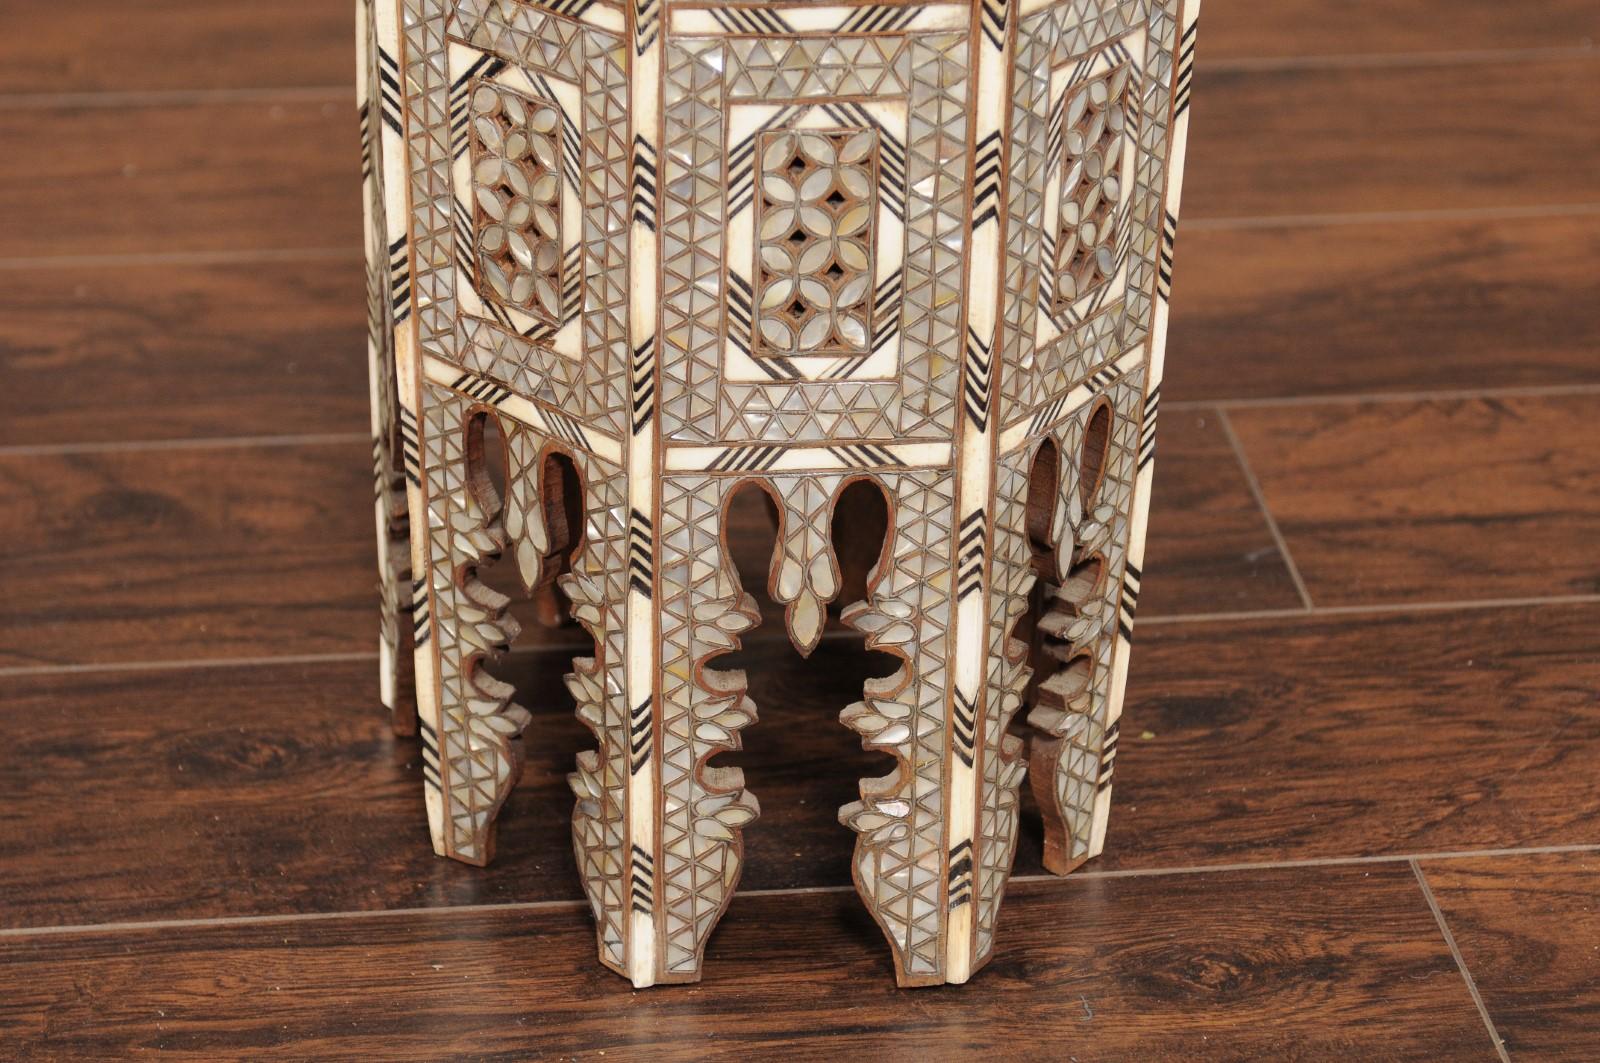 20th Century Syrian Moorish Style Hexagonal Side Table with Mother of Pearl and Bone Inlay